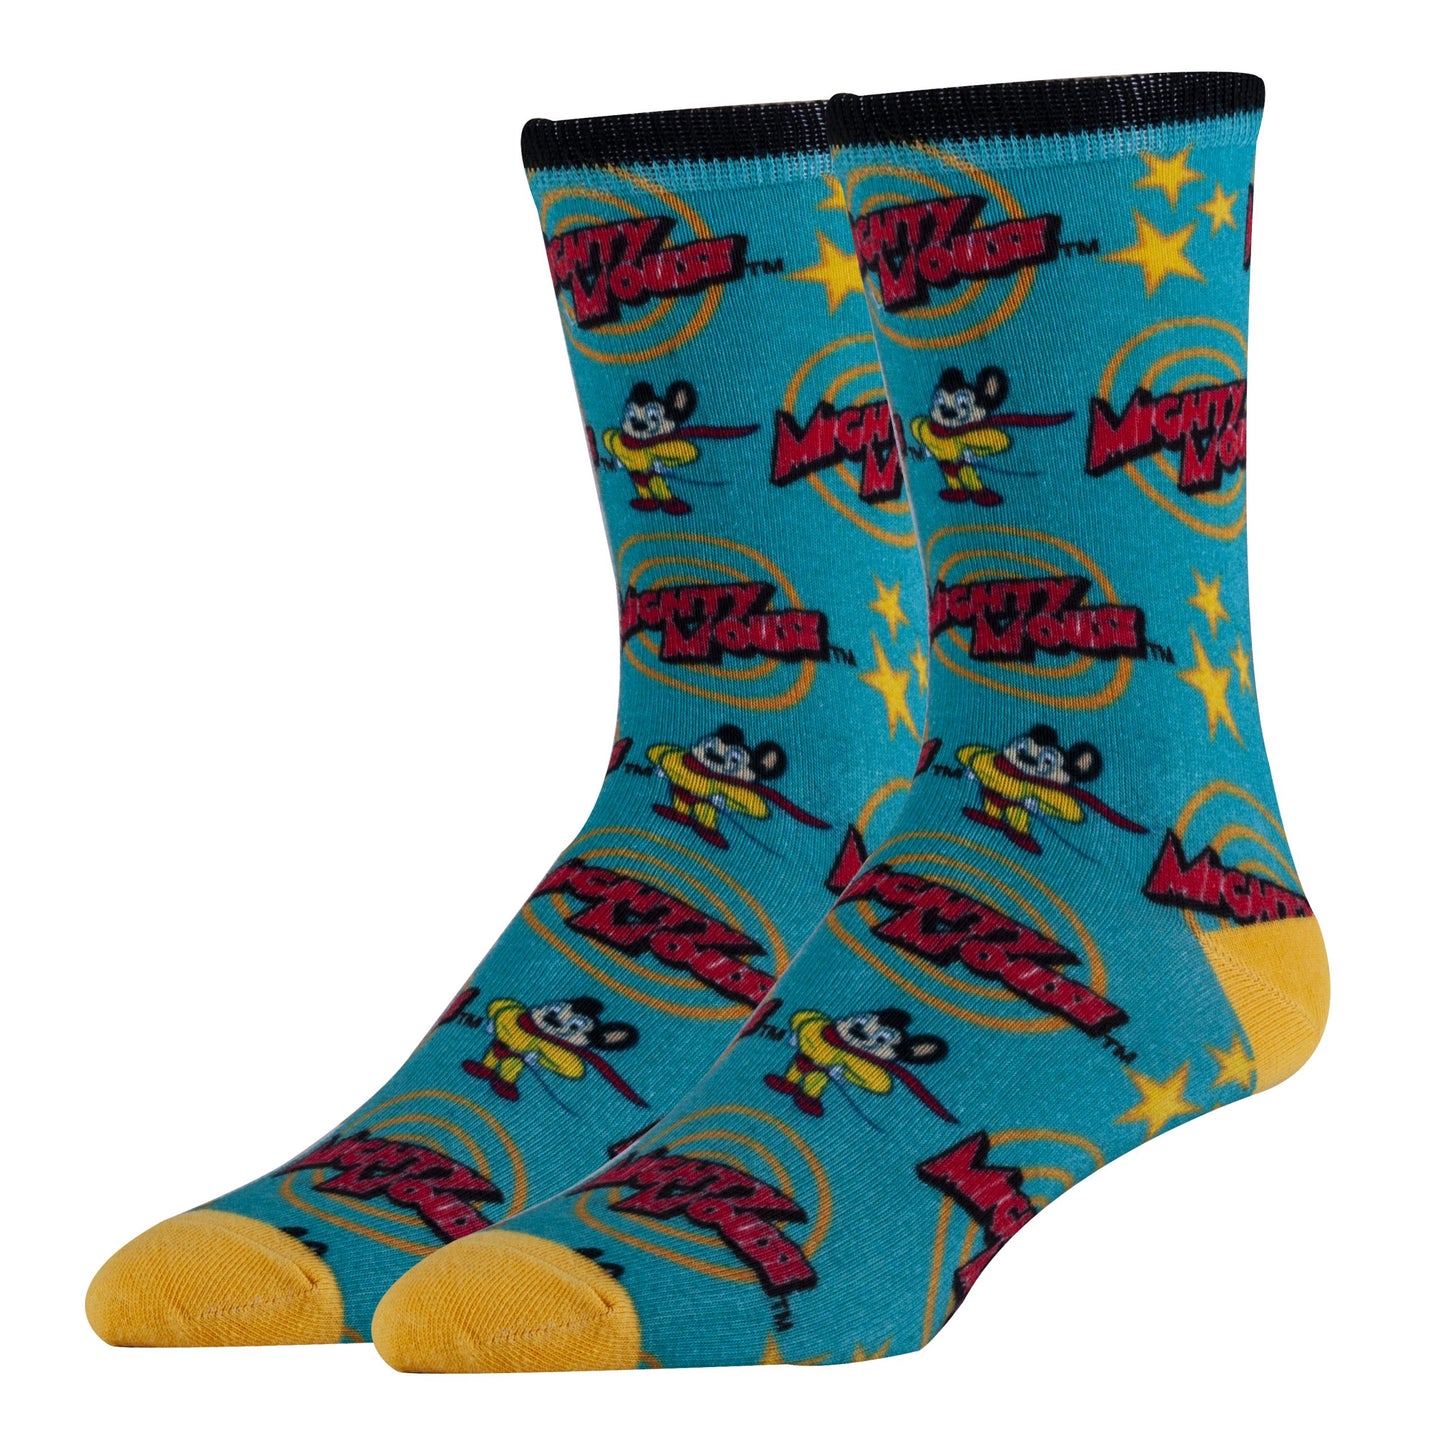 Mighty Mouse Save the Day crew sock